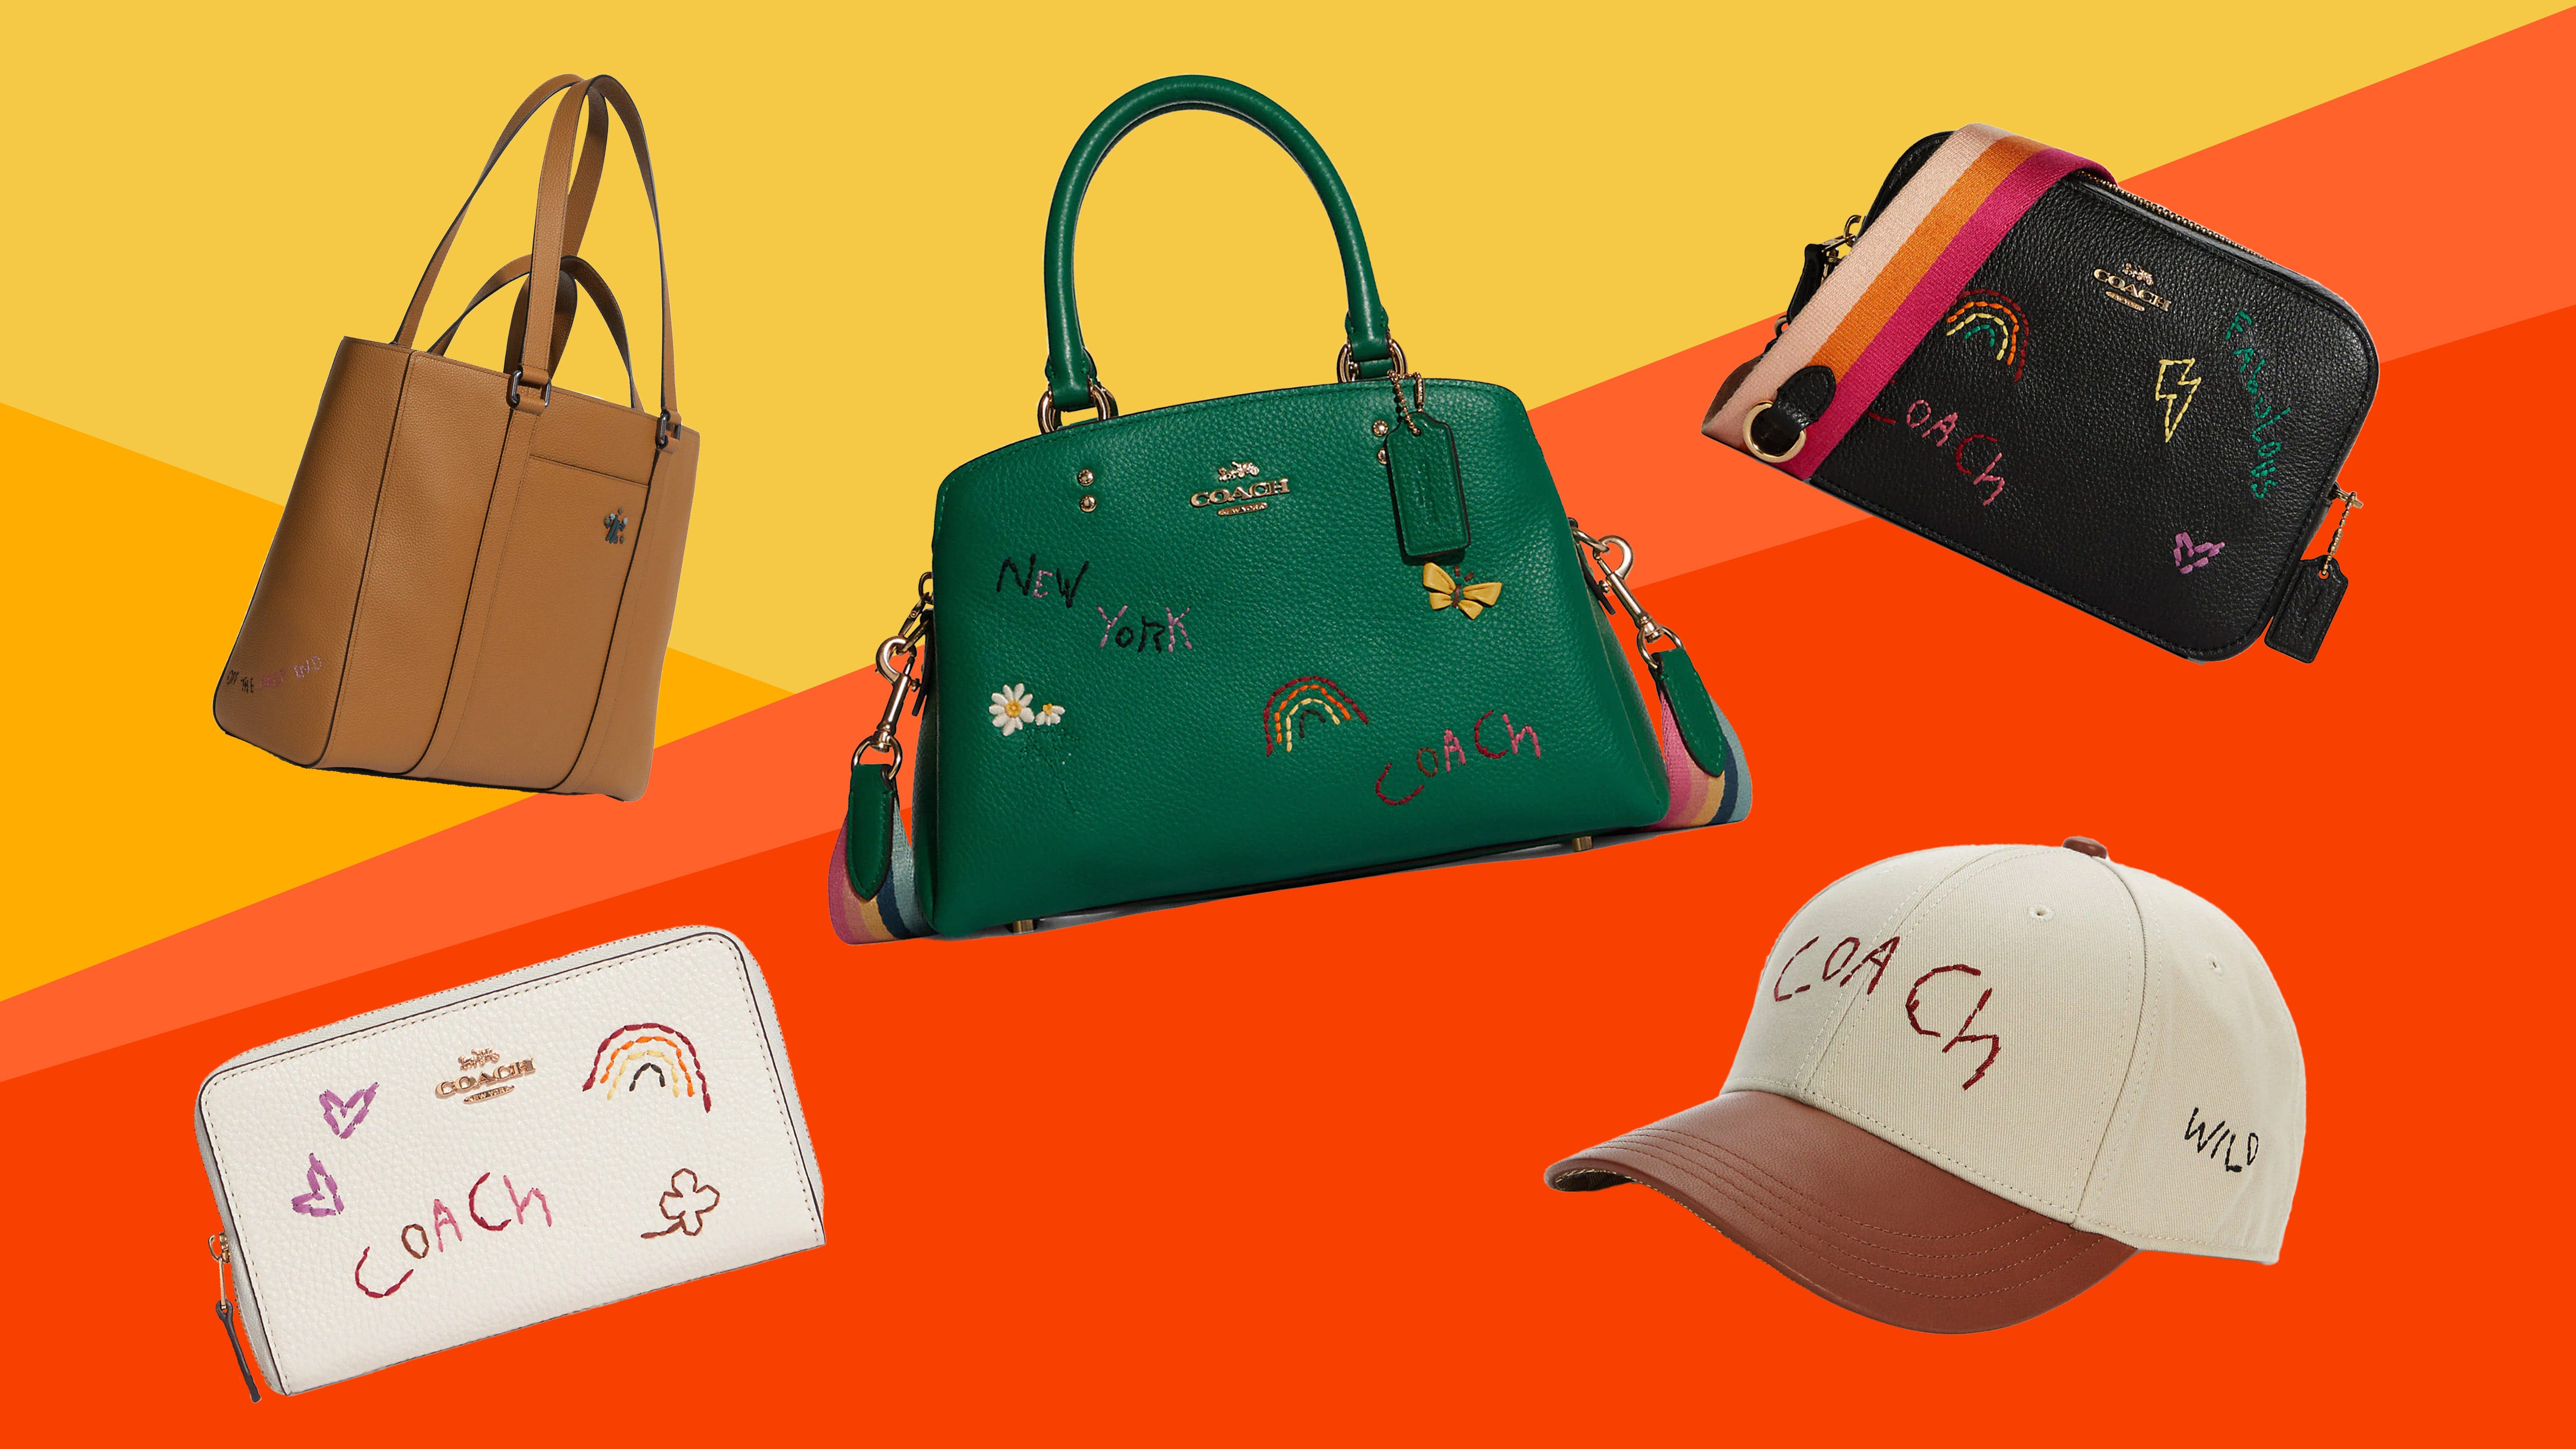 Coach Outlet Insiders get early access to The Diary Collection and 50% off chic styles